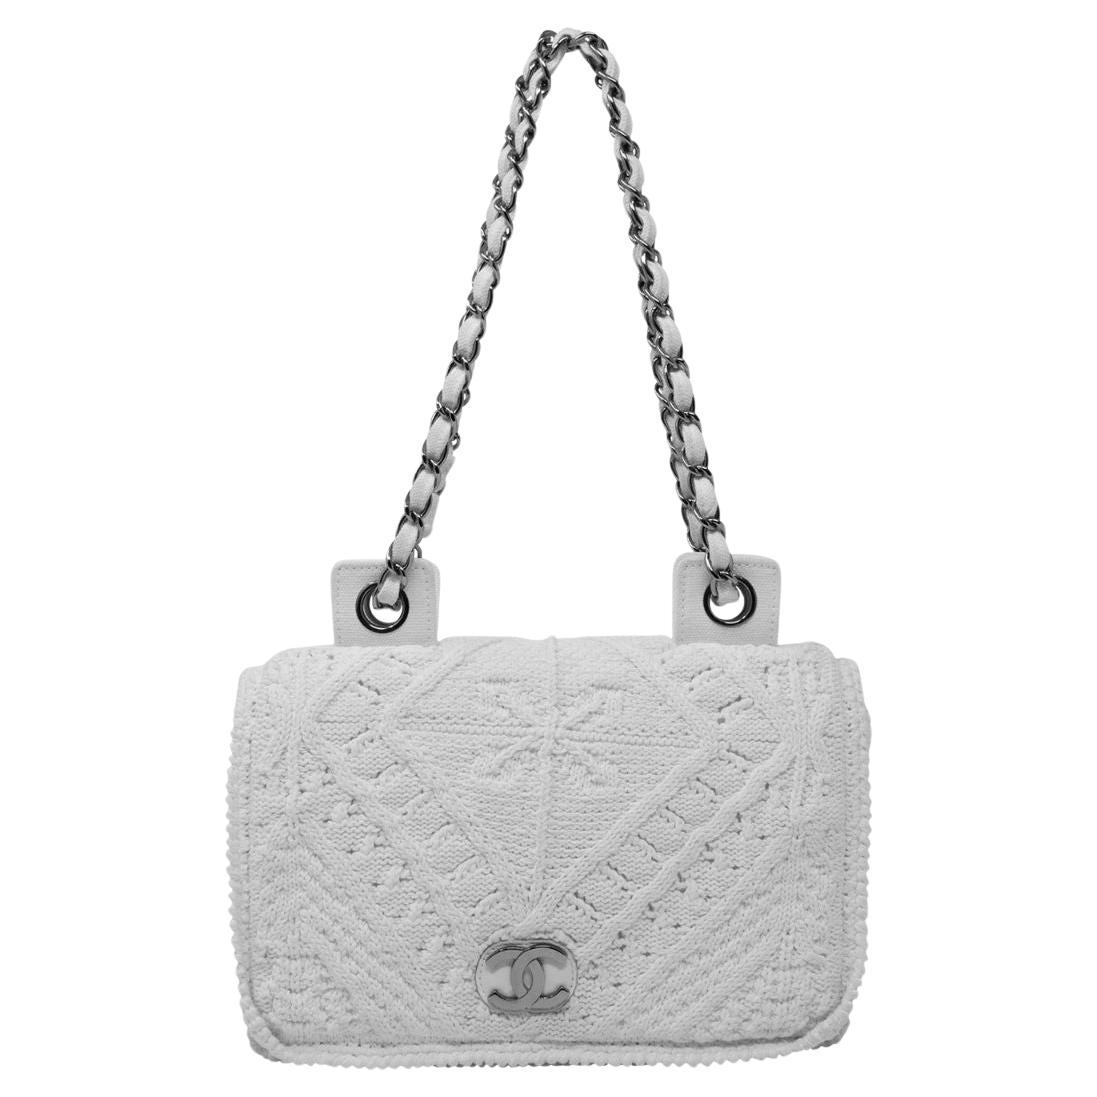 Chanel Limited Edition White Hand Knit Flap Bag For Sale